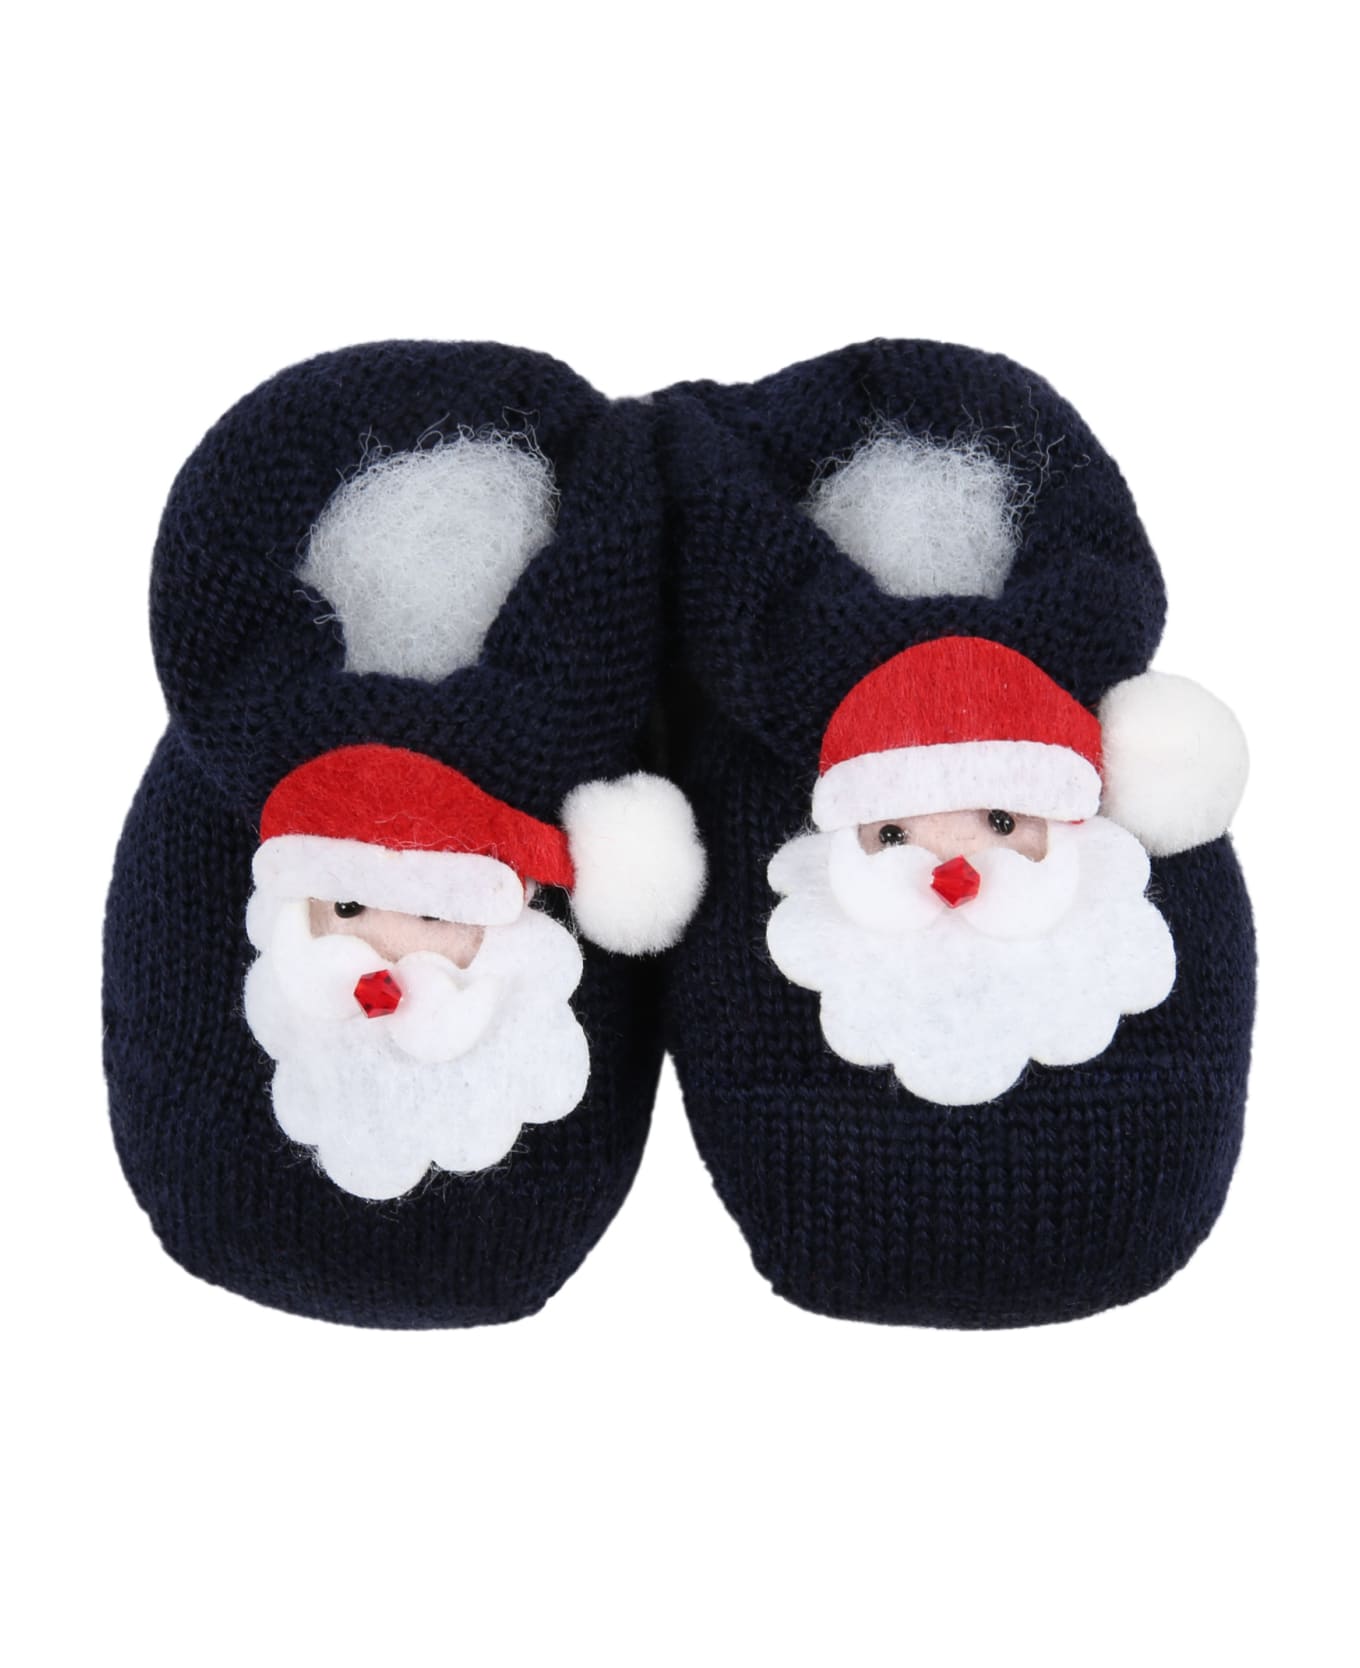 Story Loris Blue Baby-bootee For Babies With Santa Claus - Blue アクセサリー＆ギフト